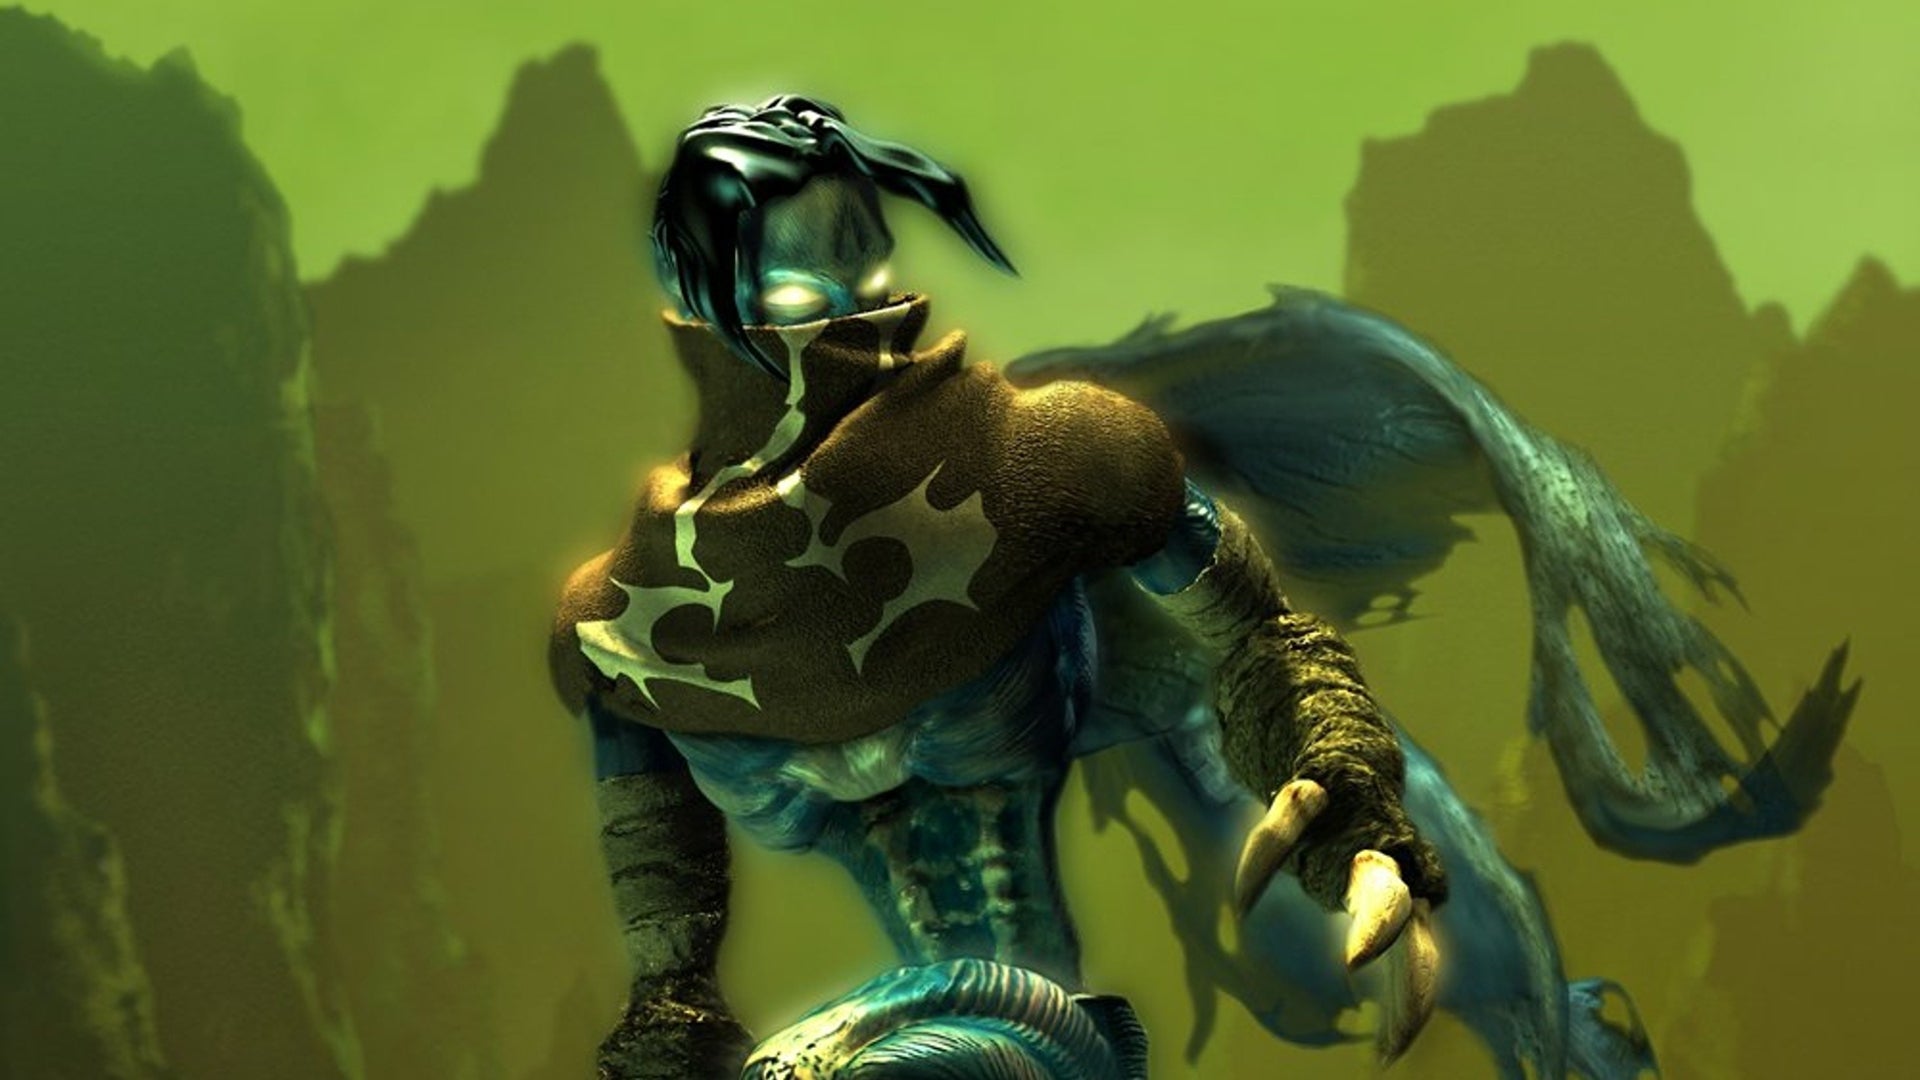 Crystal Dynamics are seeking opinions about new games in the Legacy Of Kain series.